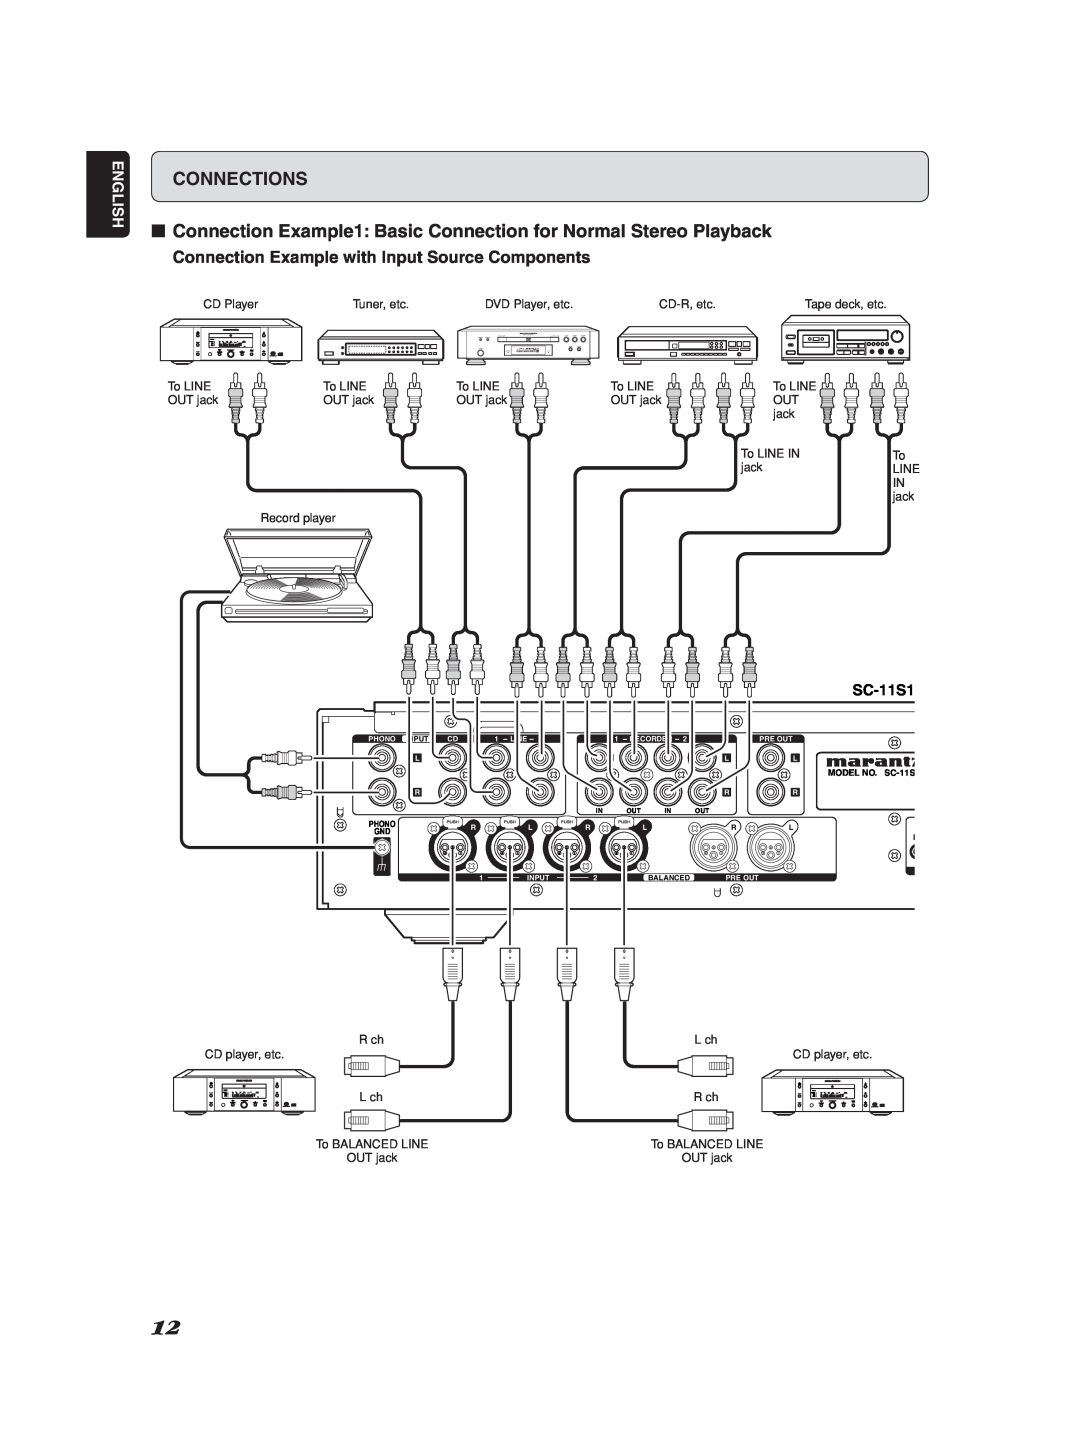 Marantz Model SC-11S1 manual Connections, Connection Example with Input Source Components, English 